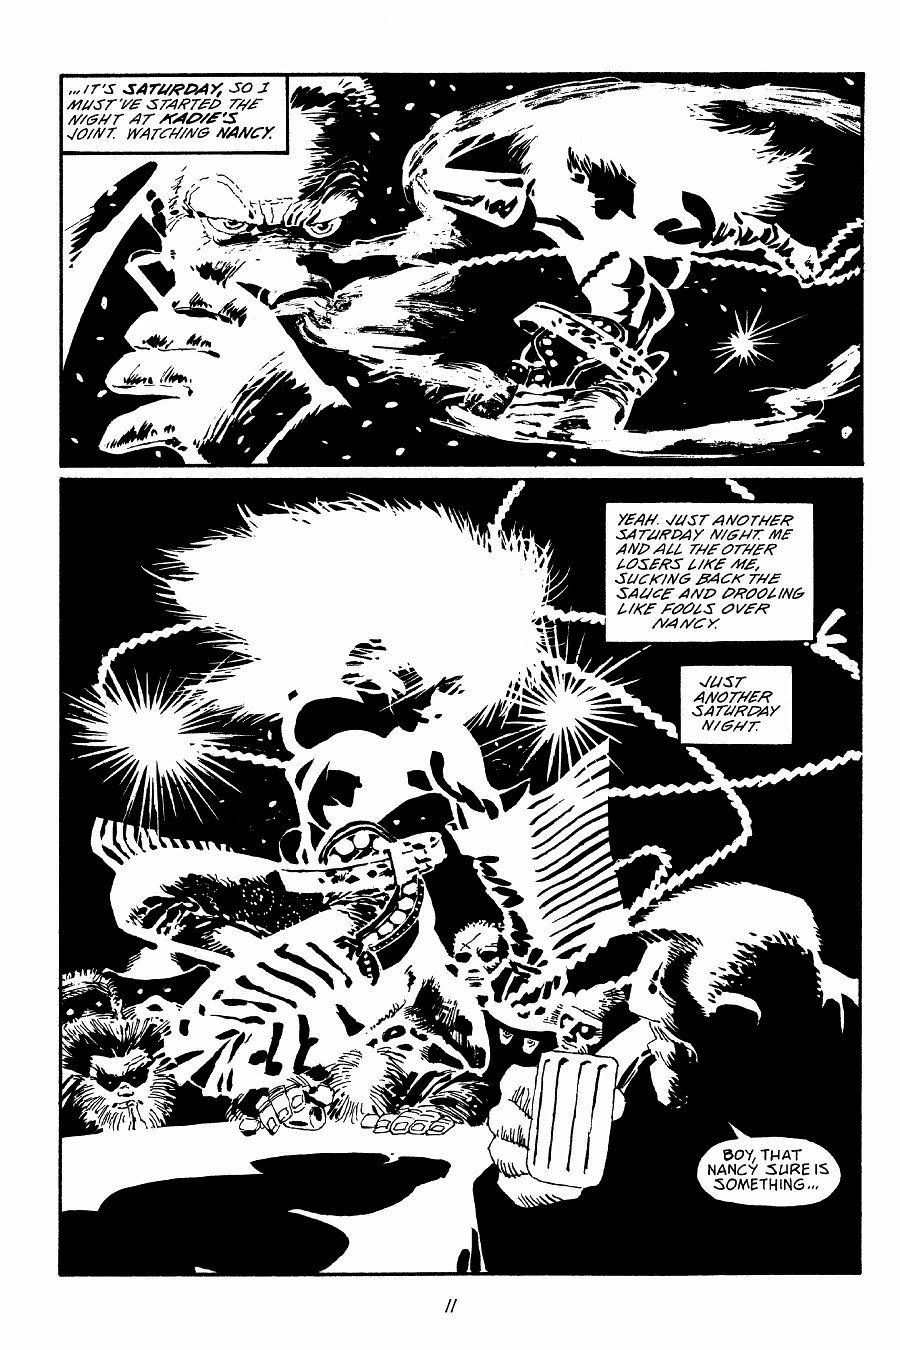 page 11 of sin city 6 booze broads and bullets